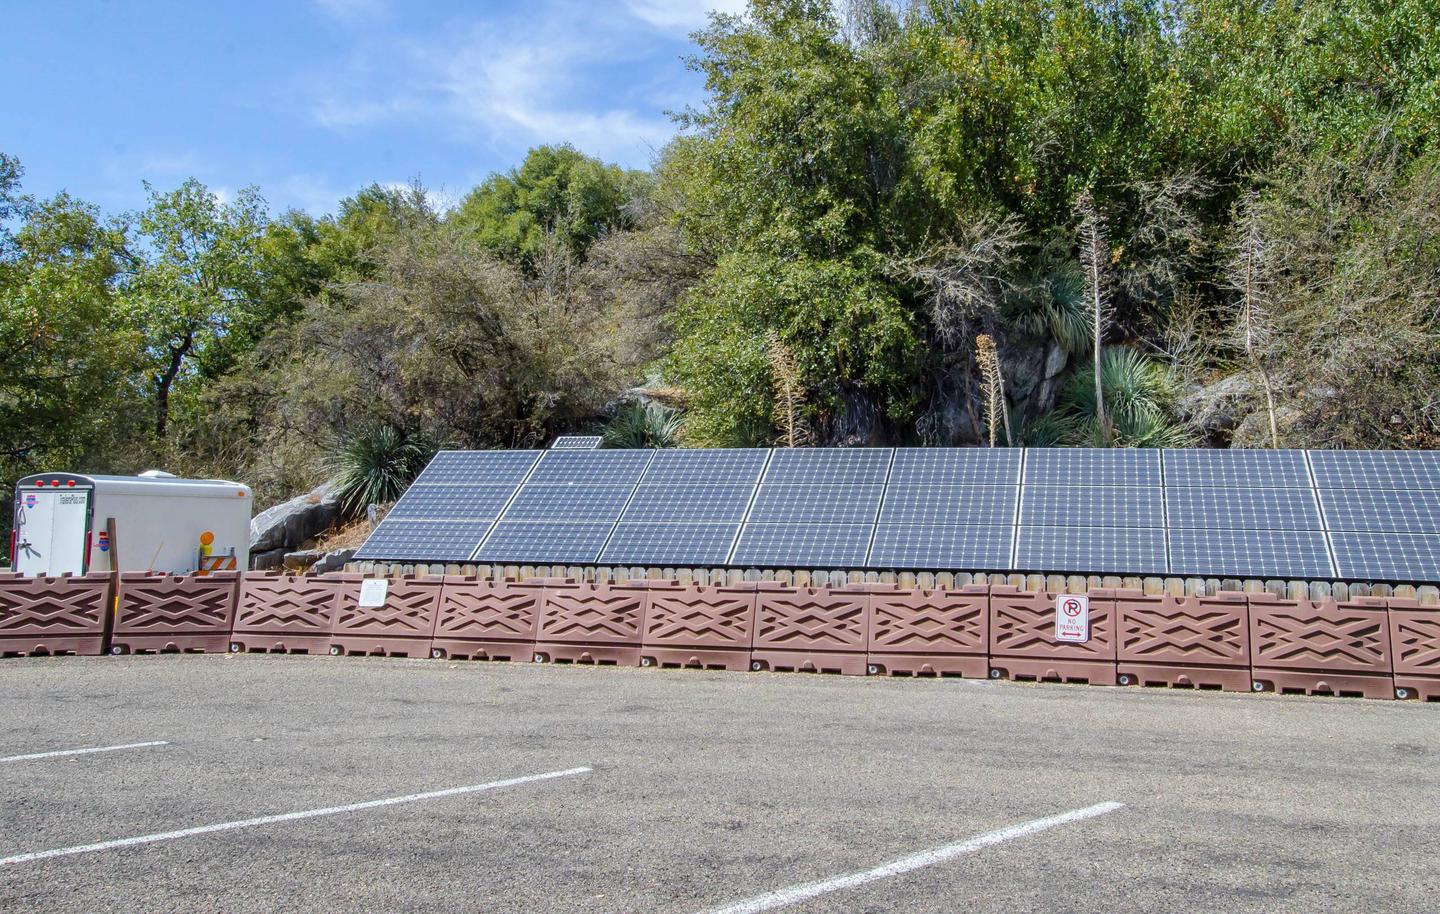 The Crystal Cave site is powered by solar panels in the parking lot. Solar Panels. 